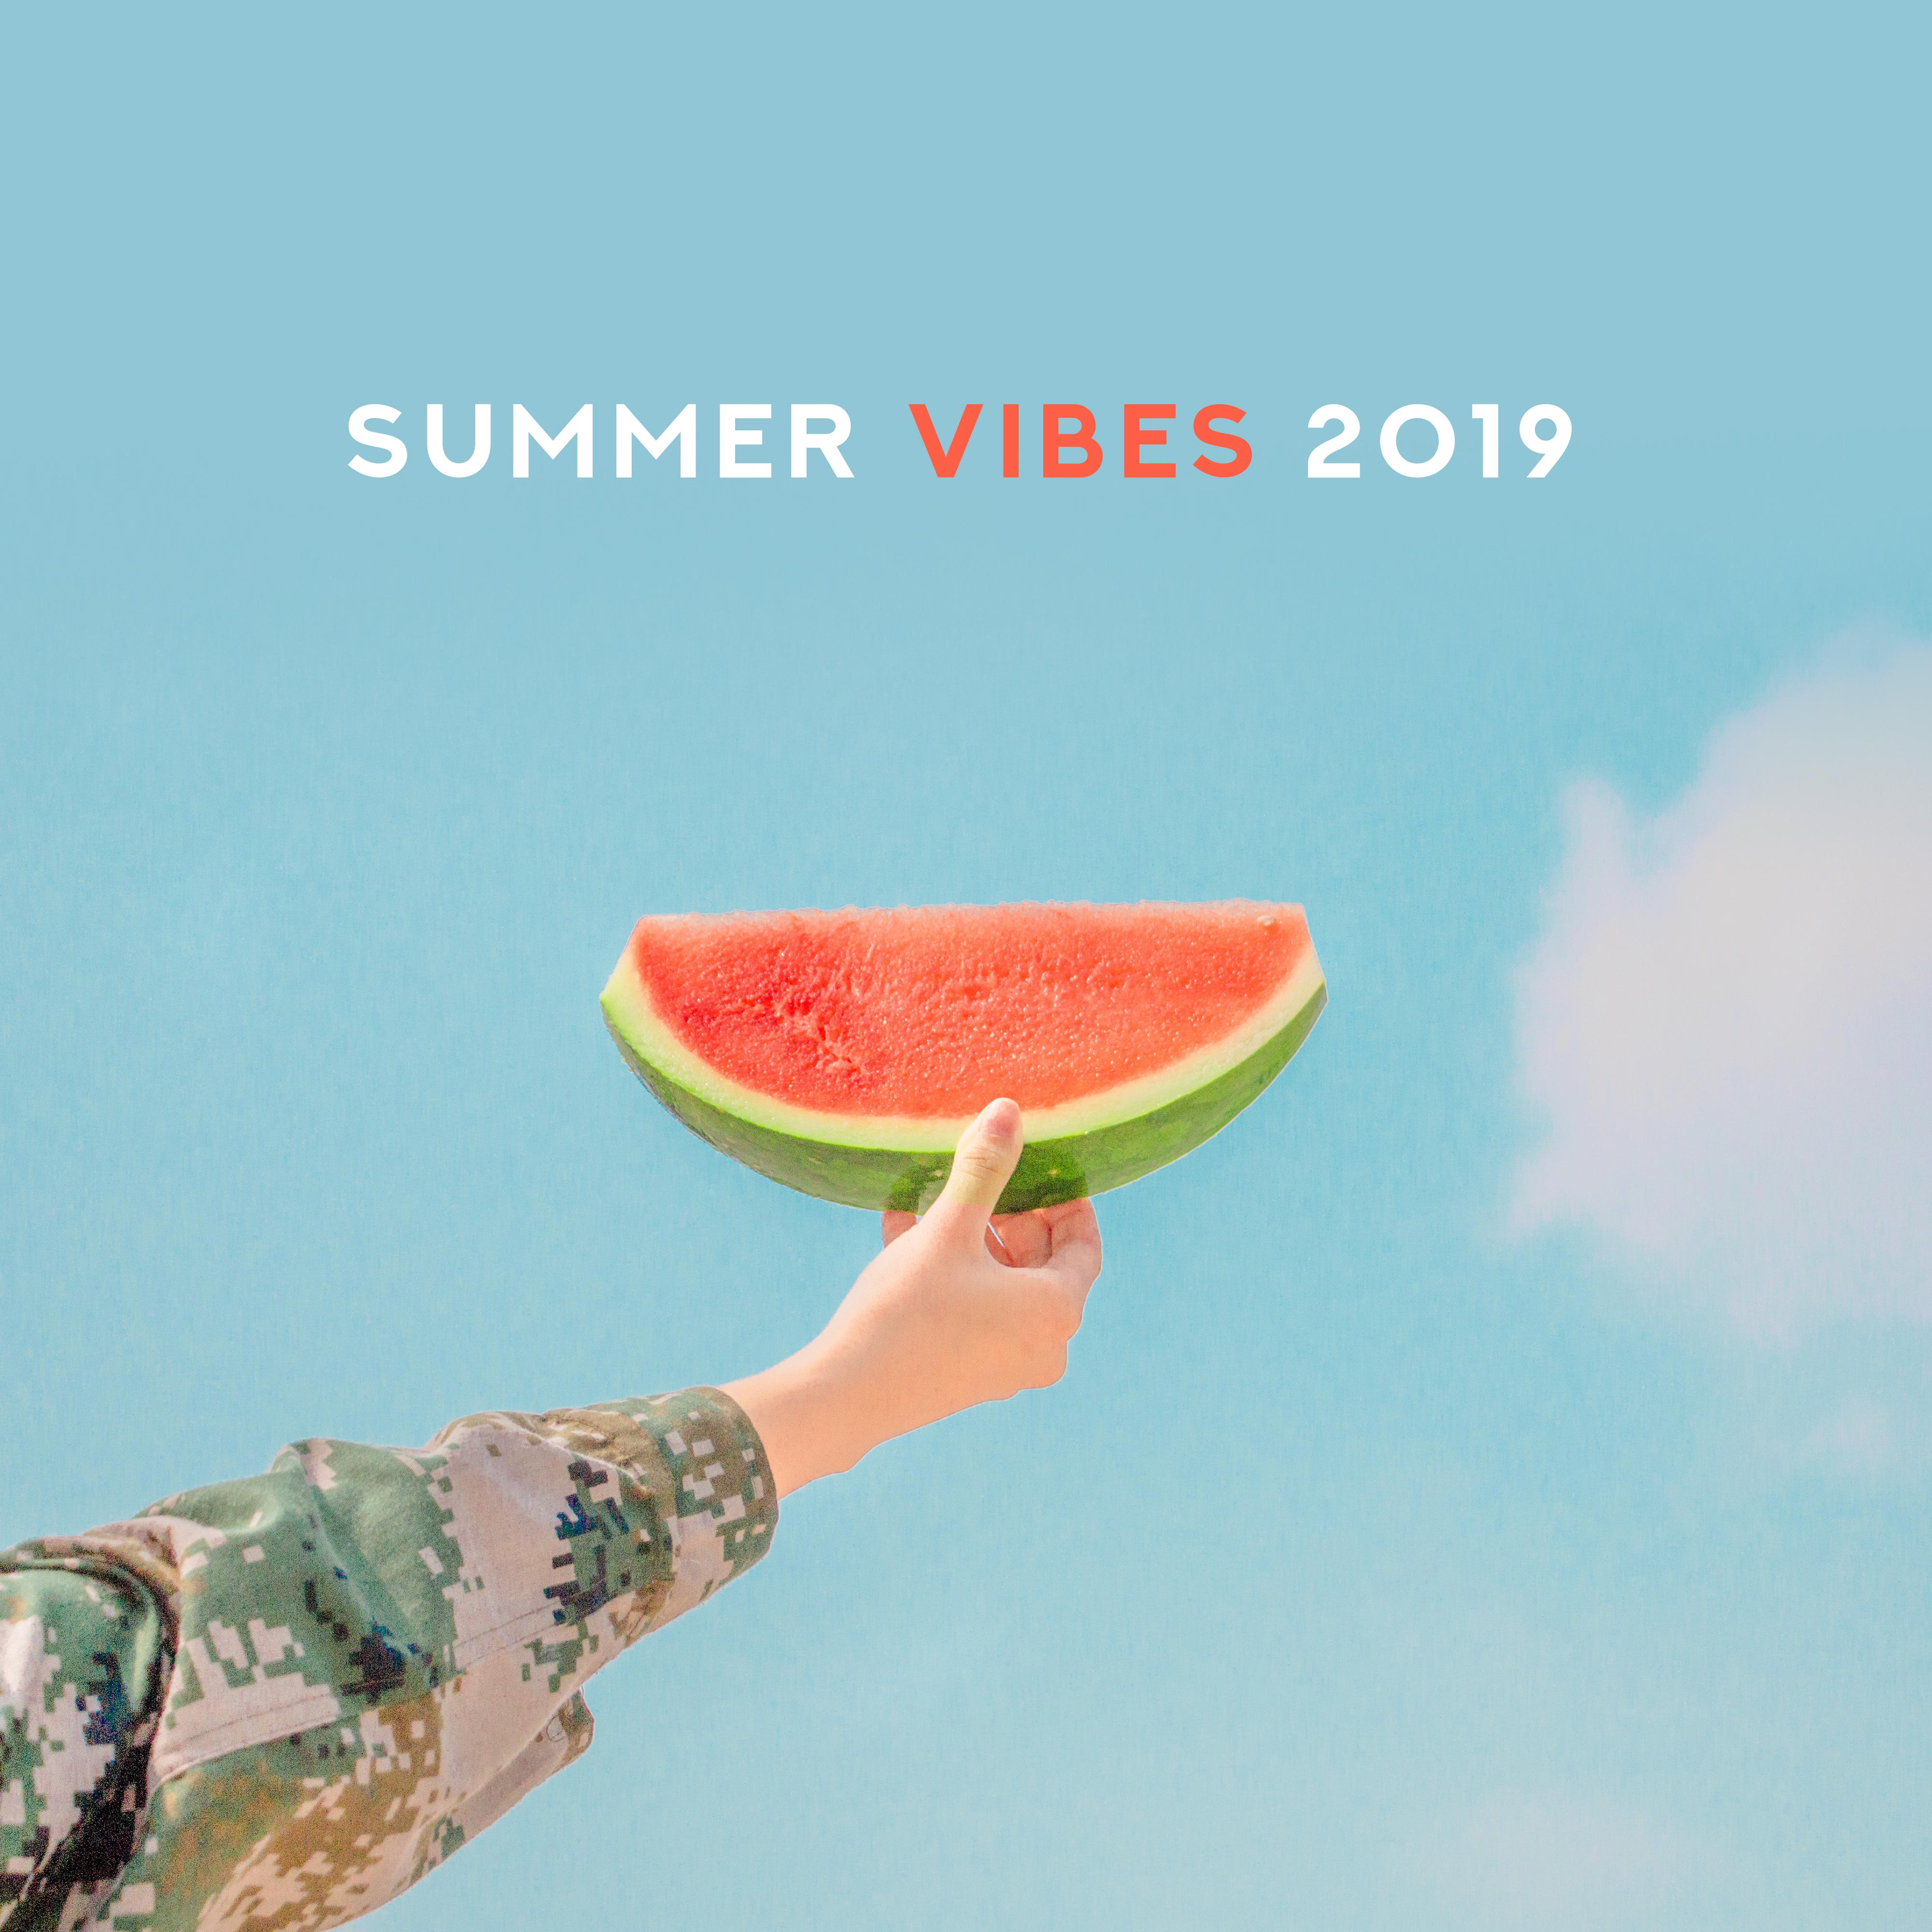 Summer Vibes 2019  Ibiza Summertime, Stress Relief, Beach Melodies, Cafe Ibiza Moments, Summer Chill Out 2019